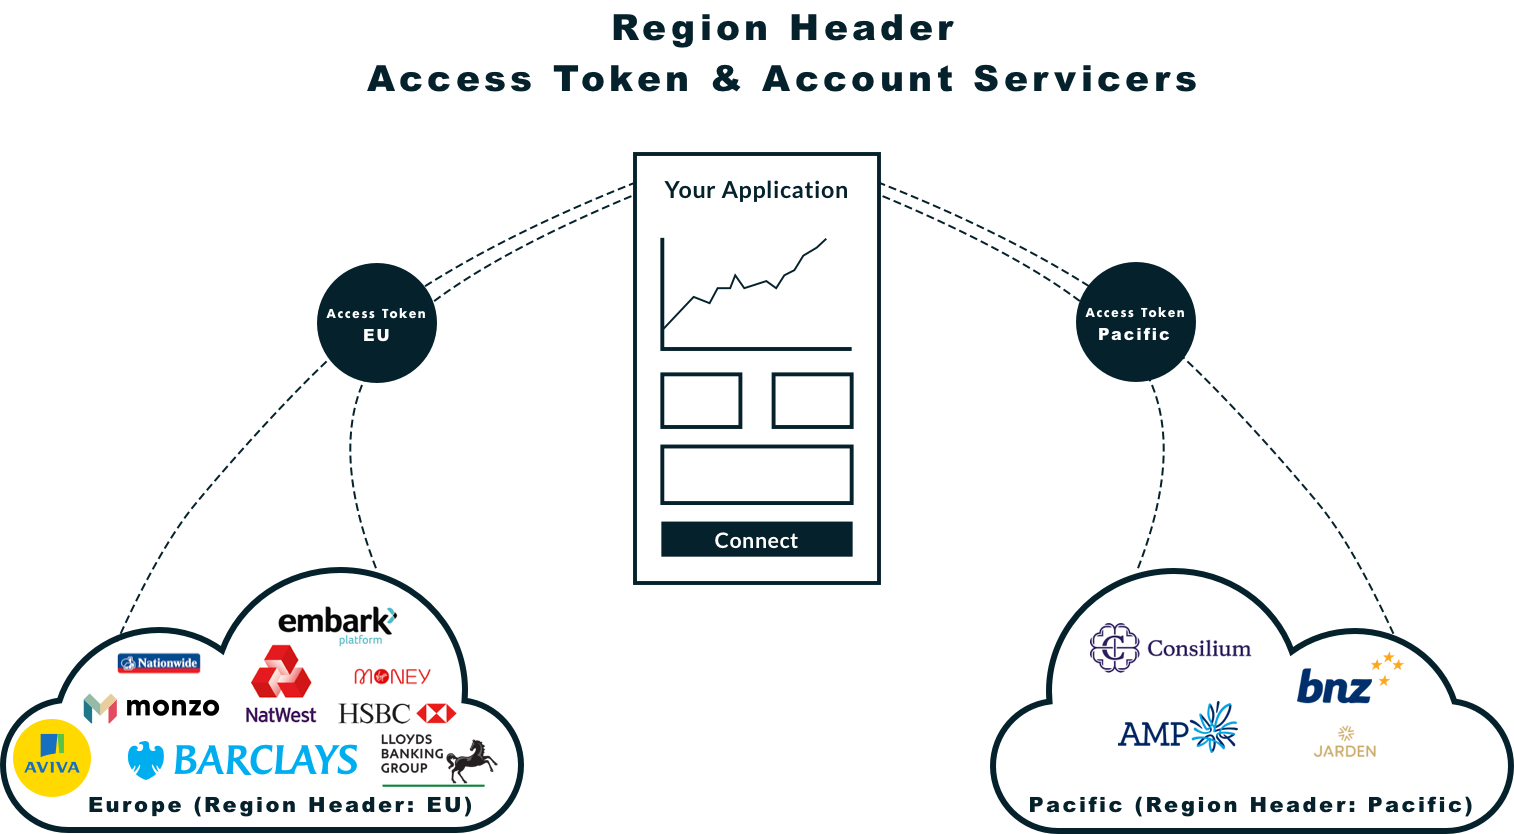 The region in your Application's access token must match the region of the account servicer you are requesting data from.